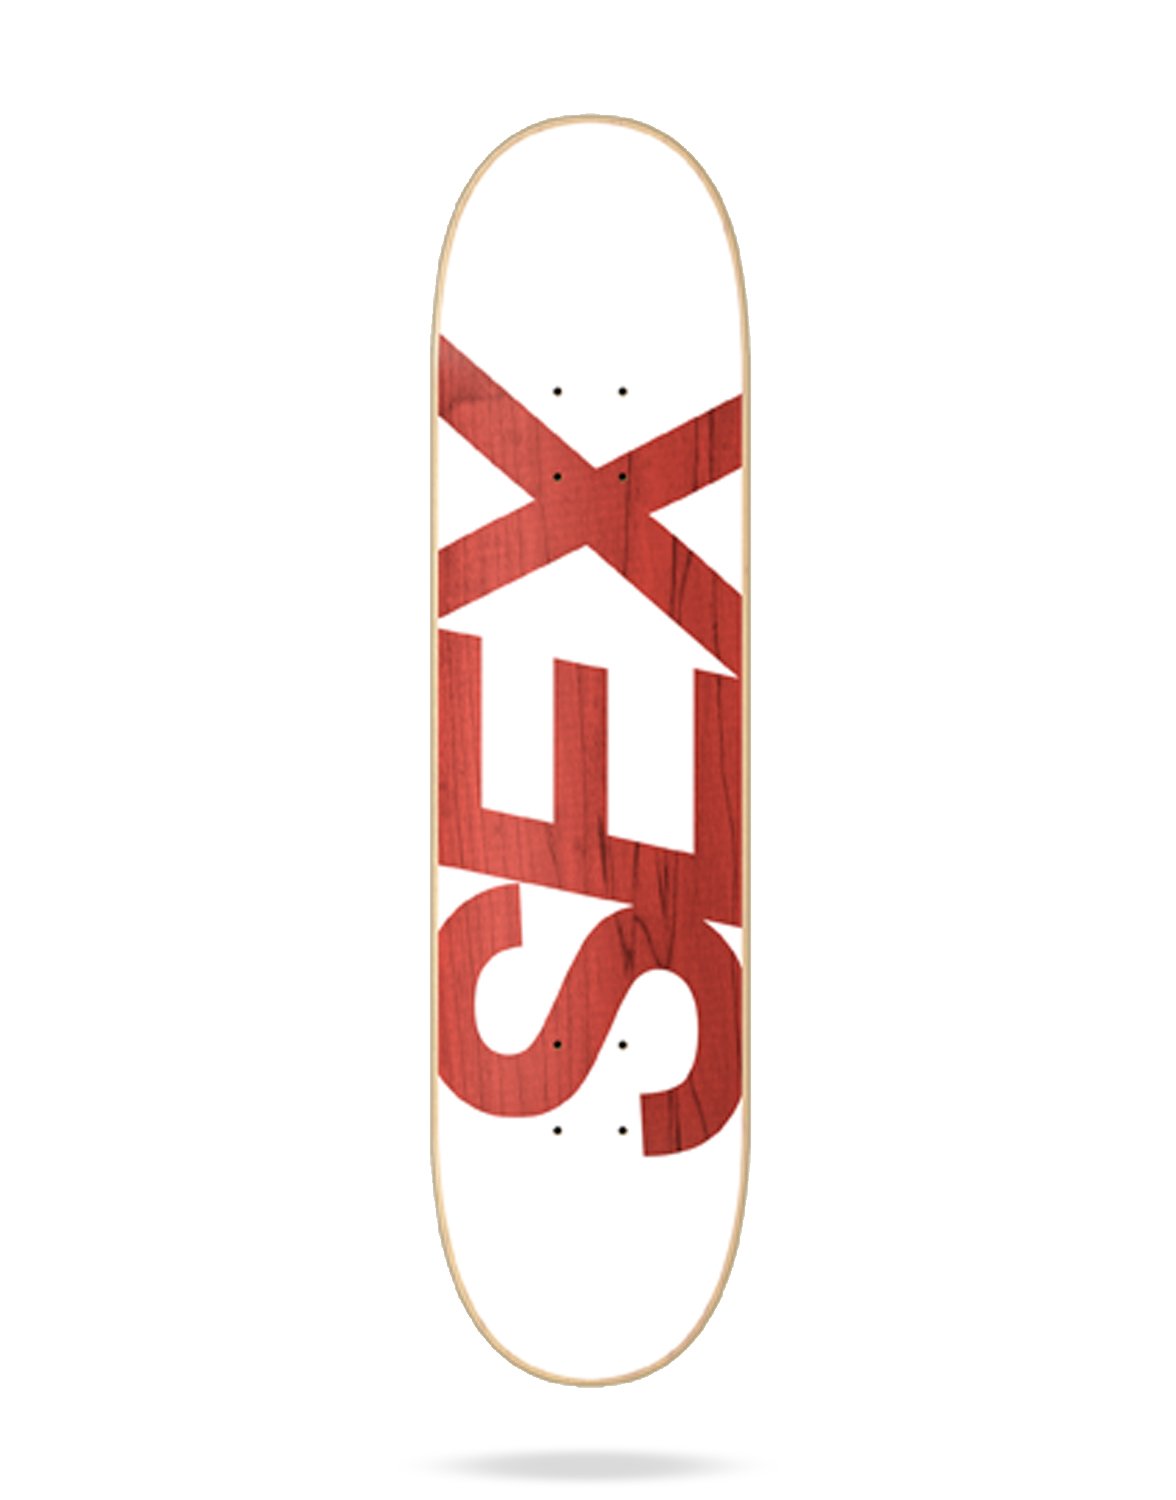 andrew word recommends sex on a skateboard pic